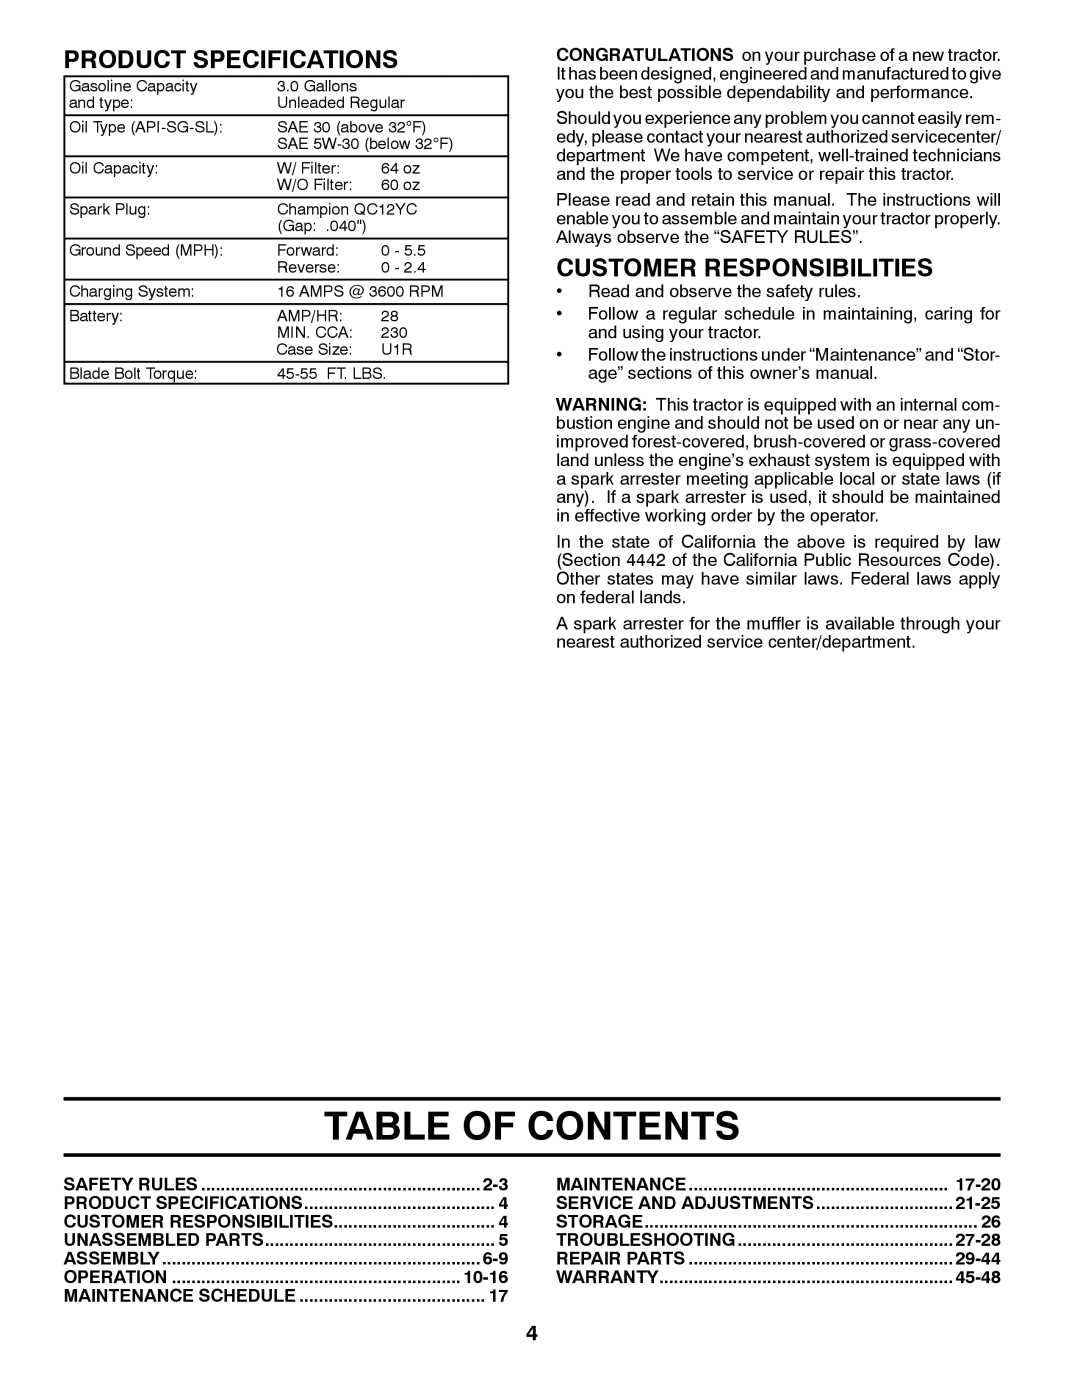 Husqvarna YTH26V54 owner manual Table Of Contents, Product Specifications, Customer Responsibilities 